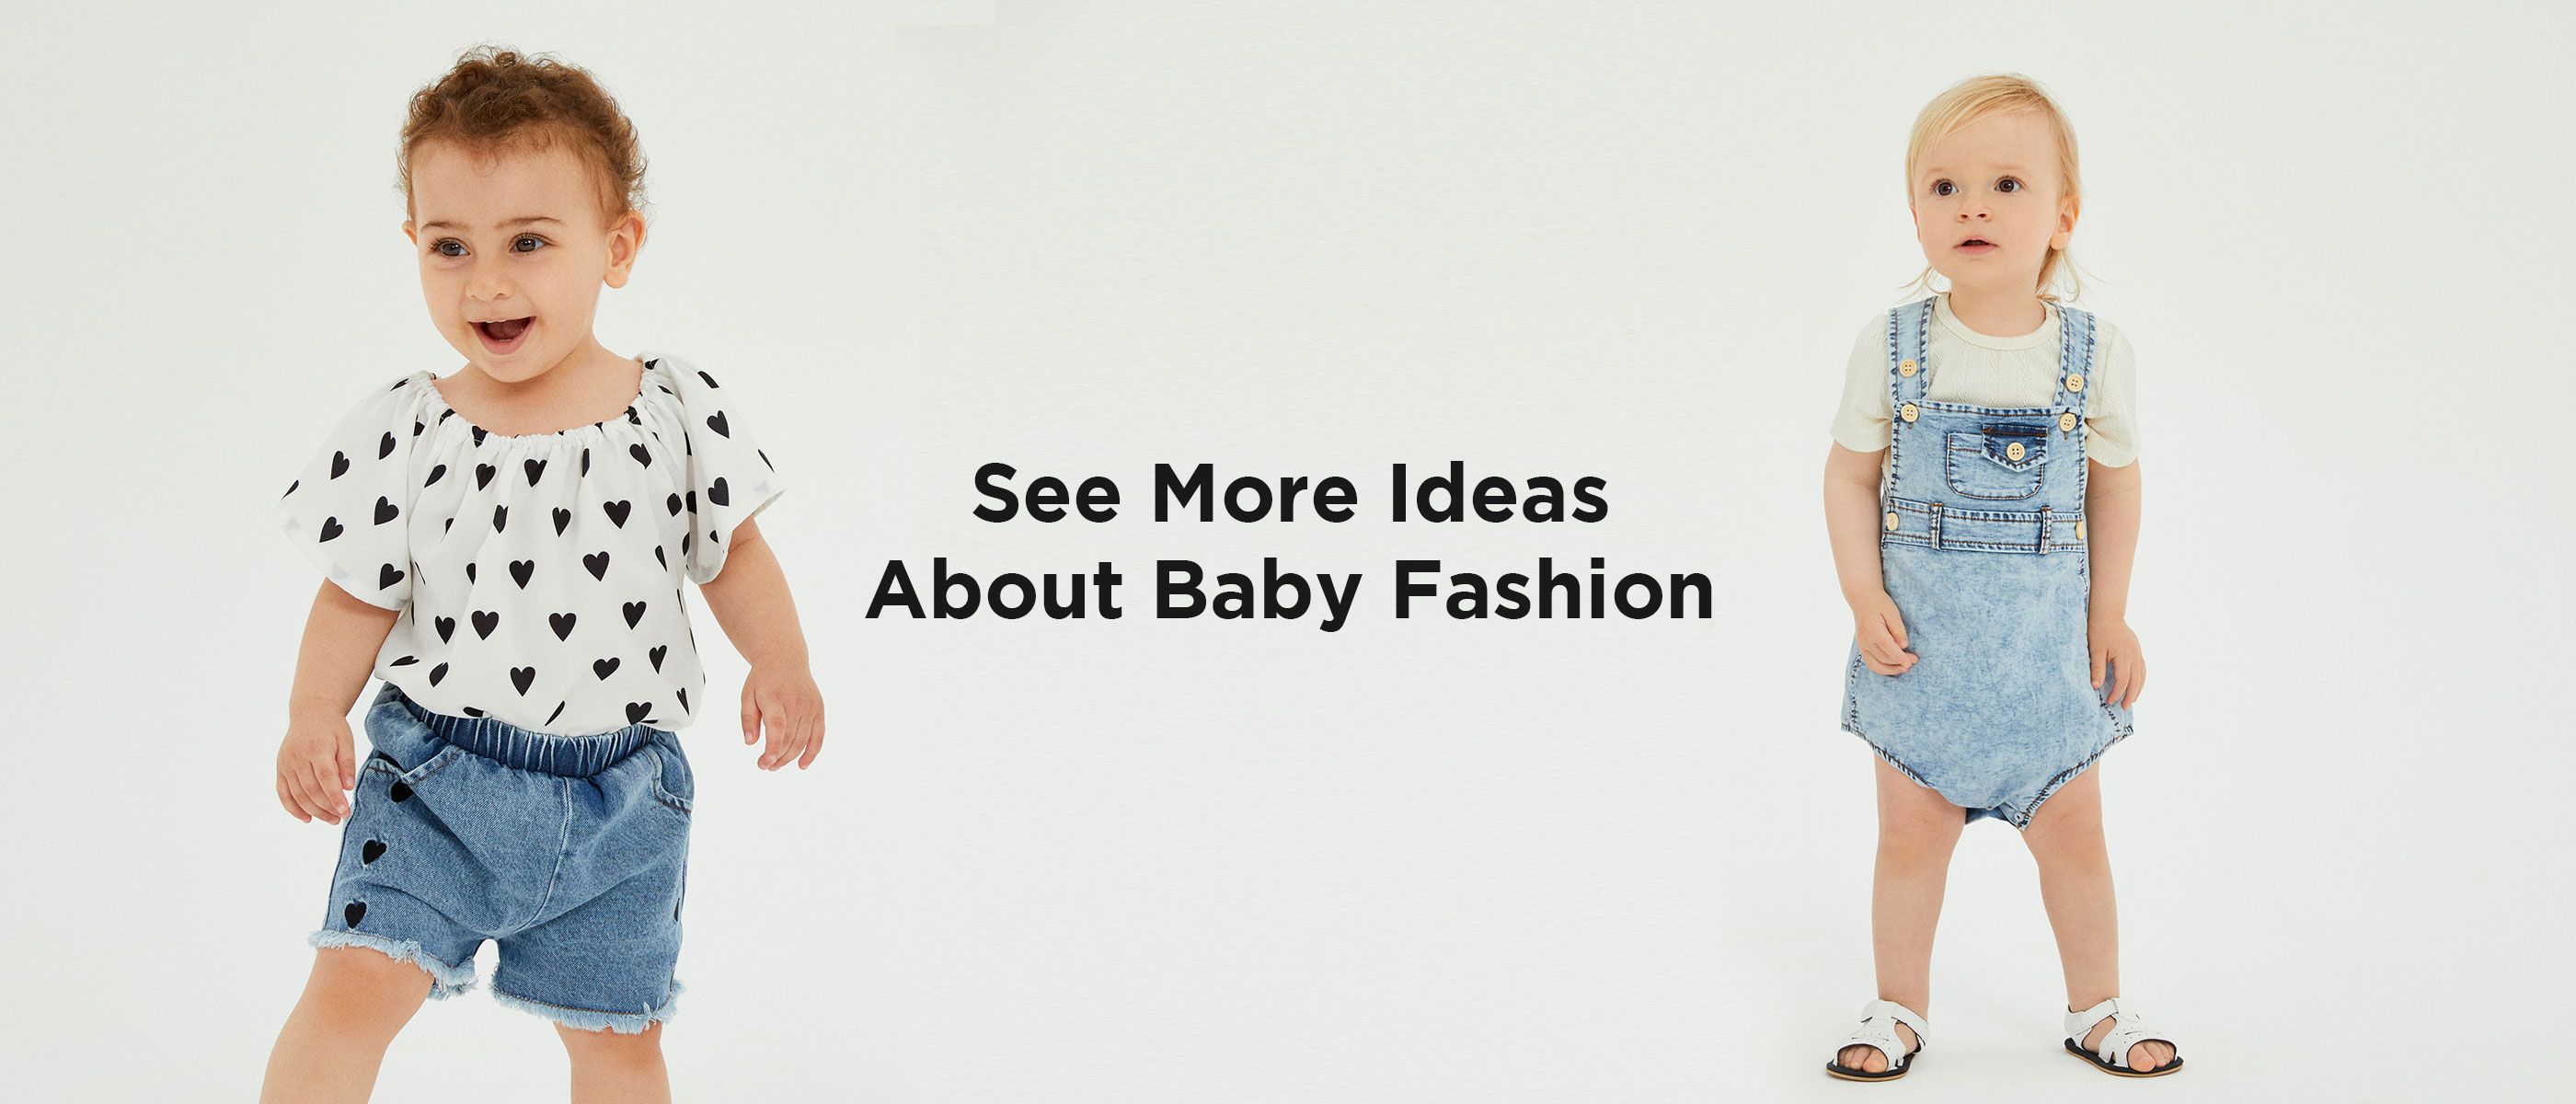 See More Ideas About Baby Fashion